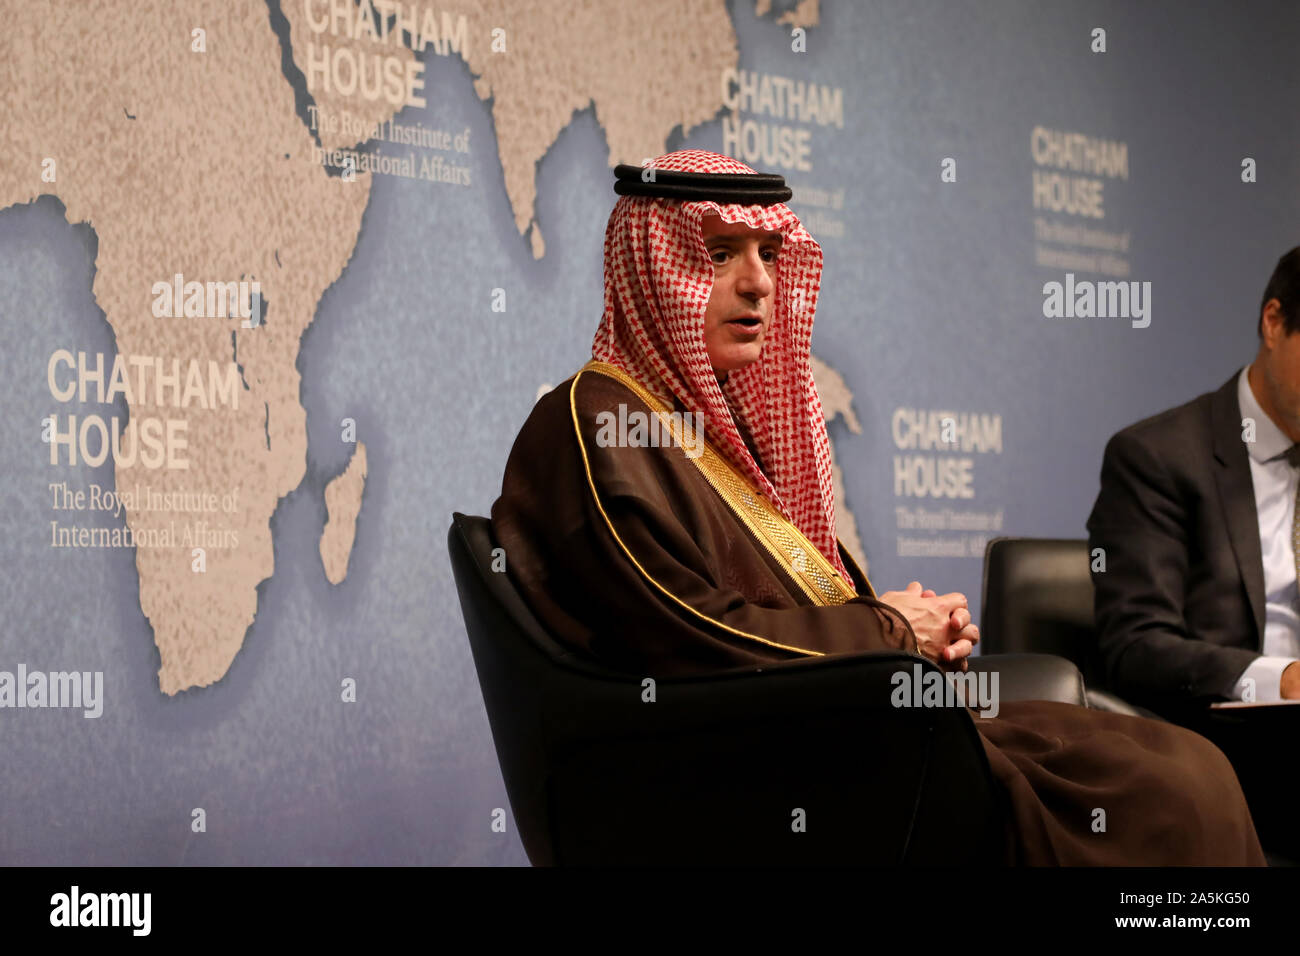 London / UK – October 14, 2019: Adel al-Jubeir, Saudi Arabia’s minister of state for foreign affairs, speaking at Chatham House on Saudi foreign policy Stock Photo